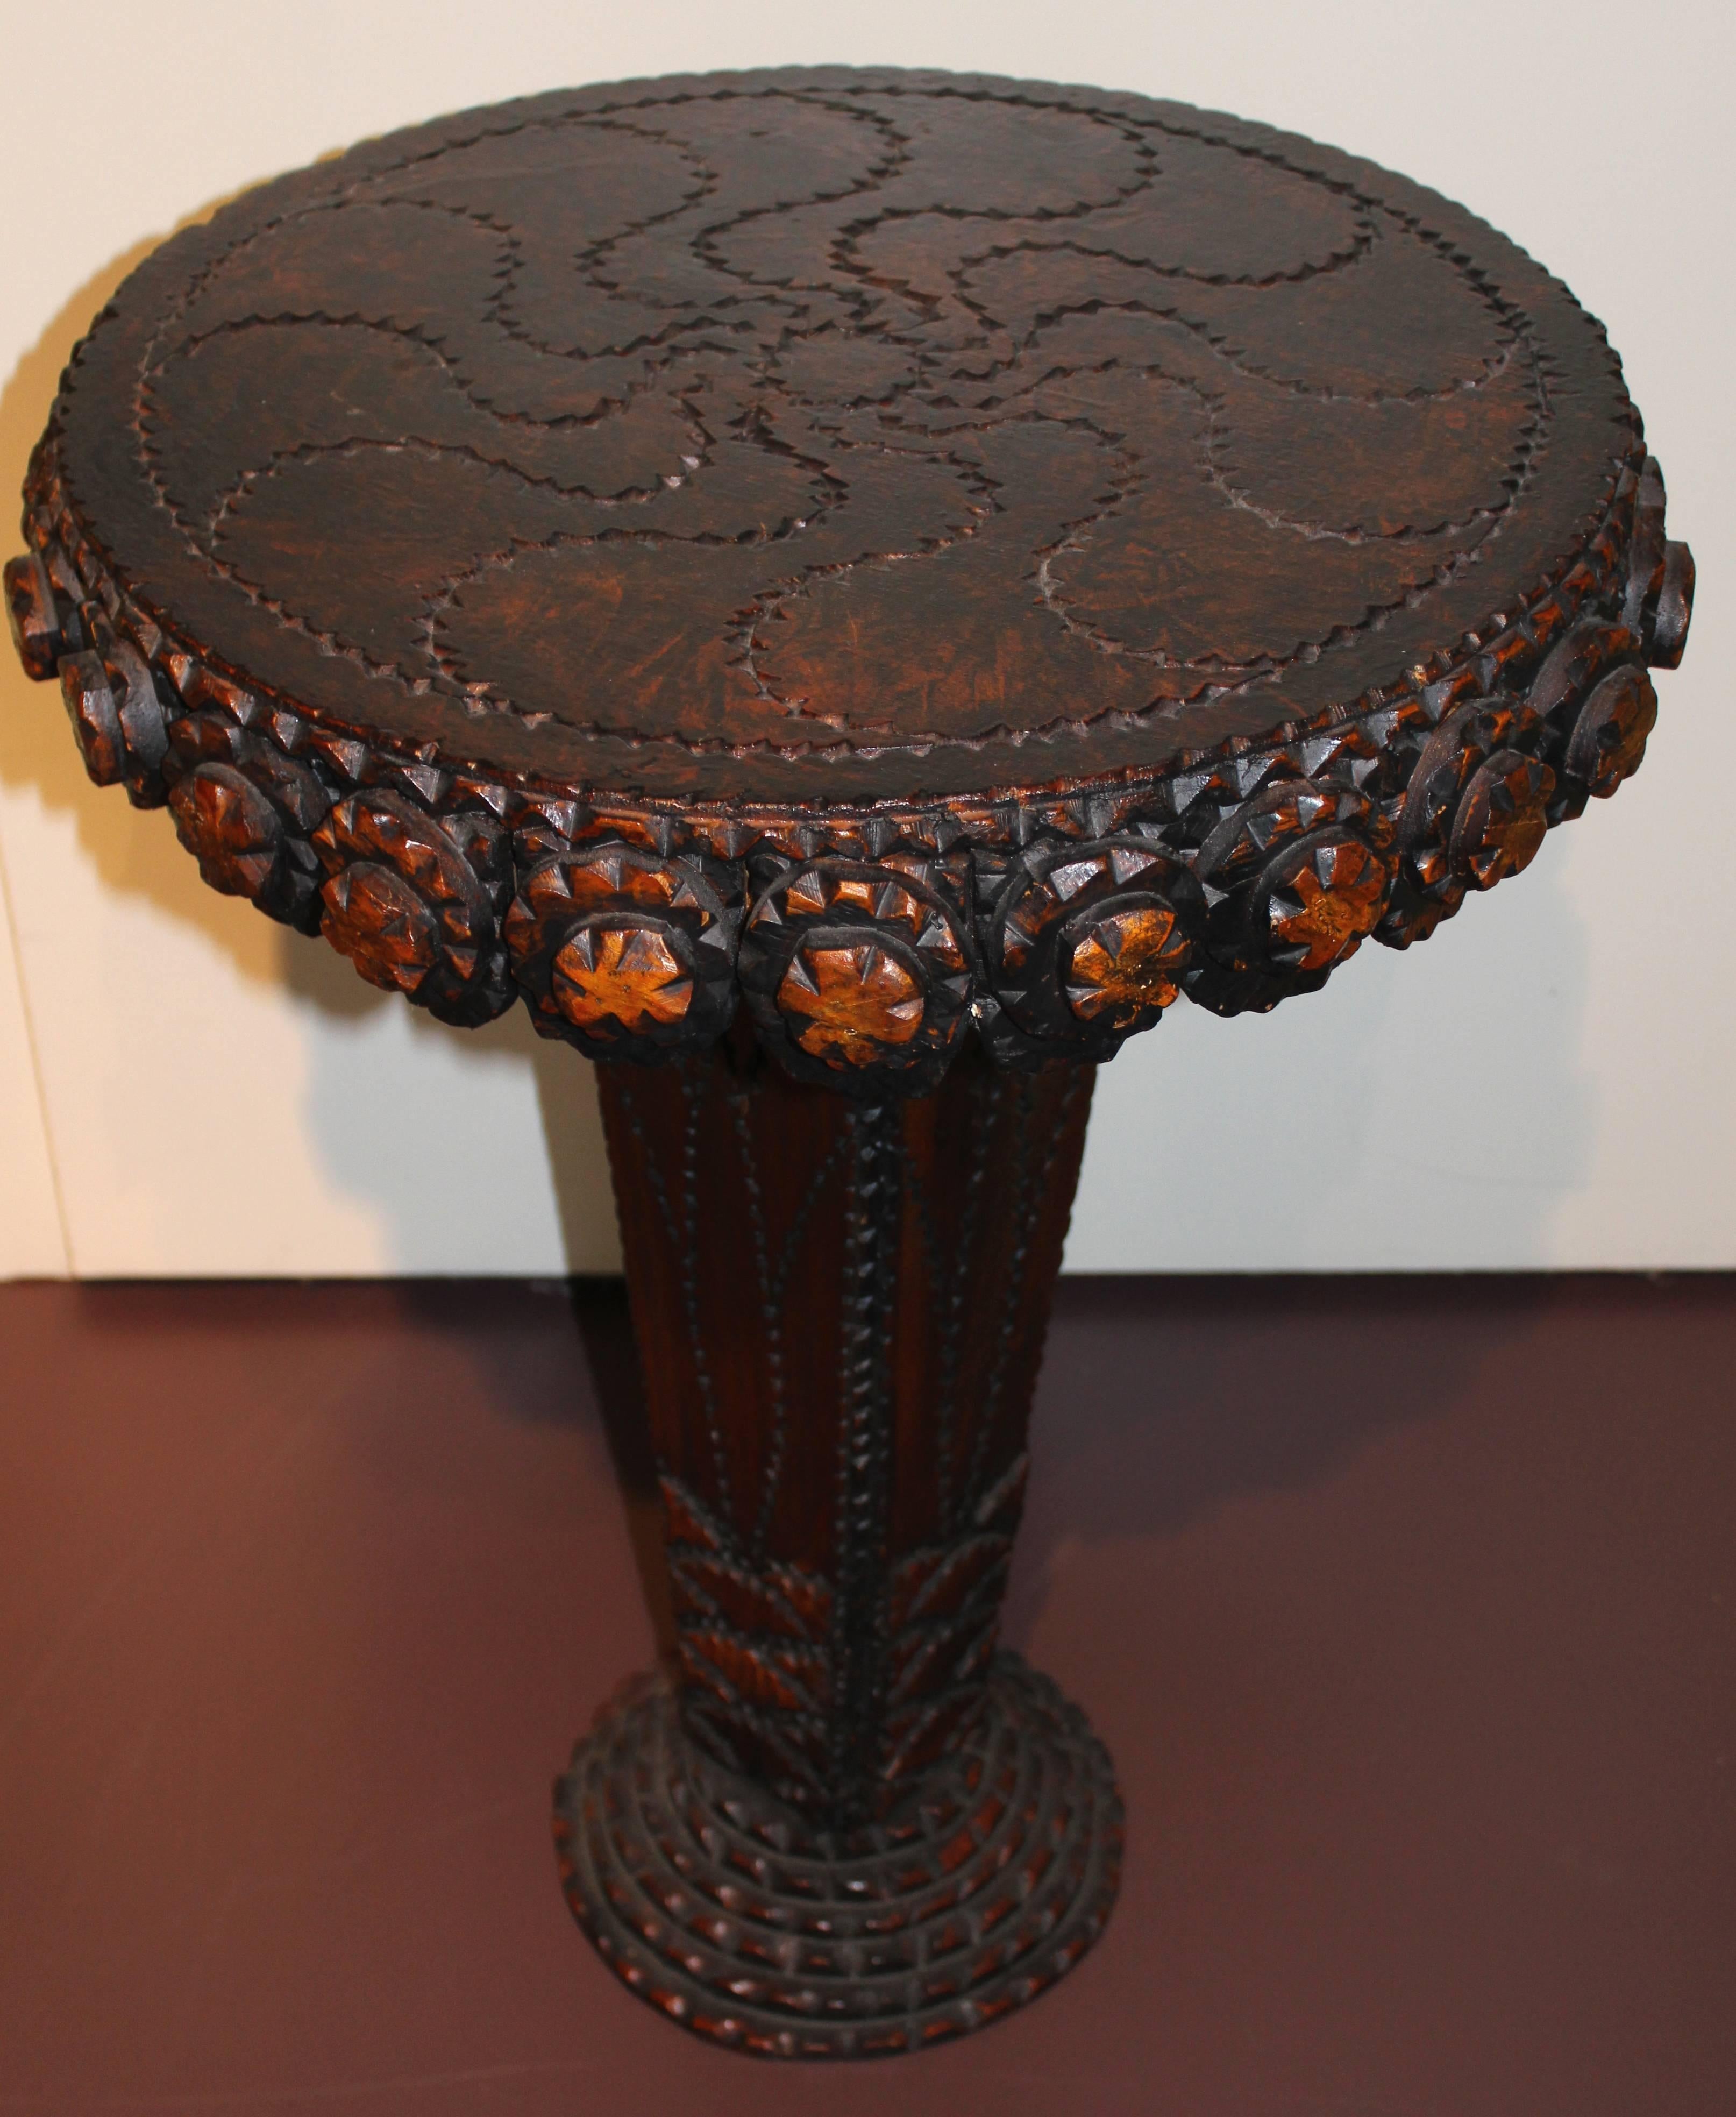 This wonderfully carved wooden tramp art table was carved by the group known as the Hermitage Artists. This group of artists began in New York with five men: Michael Lavery, Andy Stutter, Jim Kennedy, Paul Cunningham, and Ira Rogoff. This group of